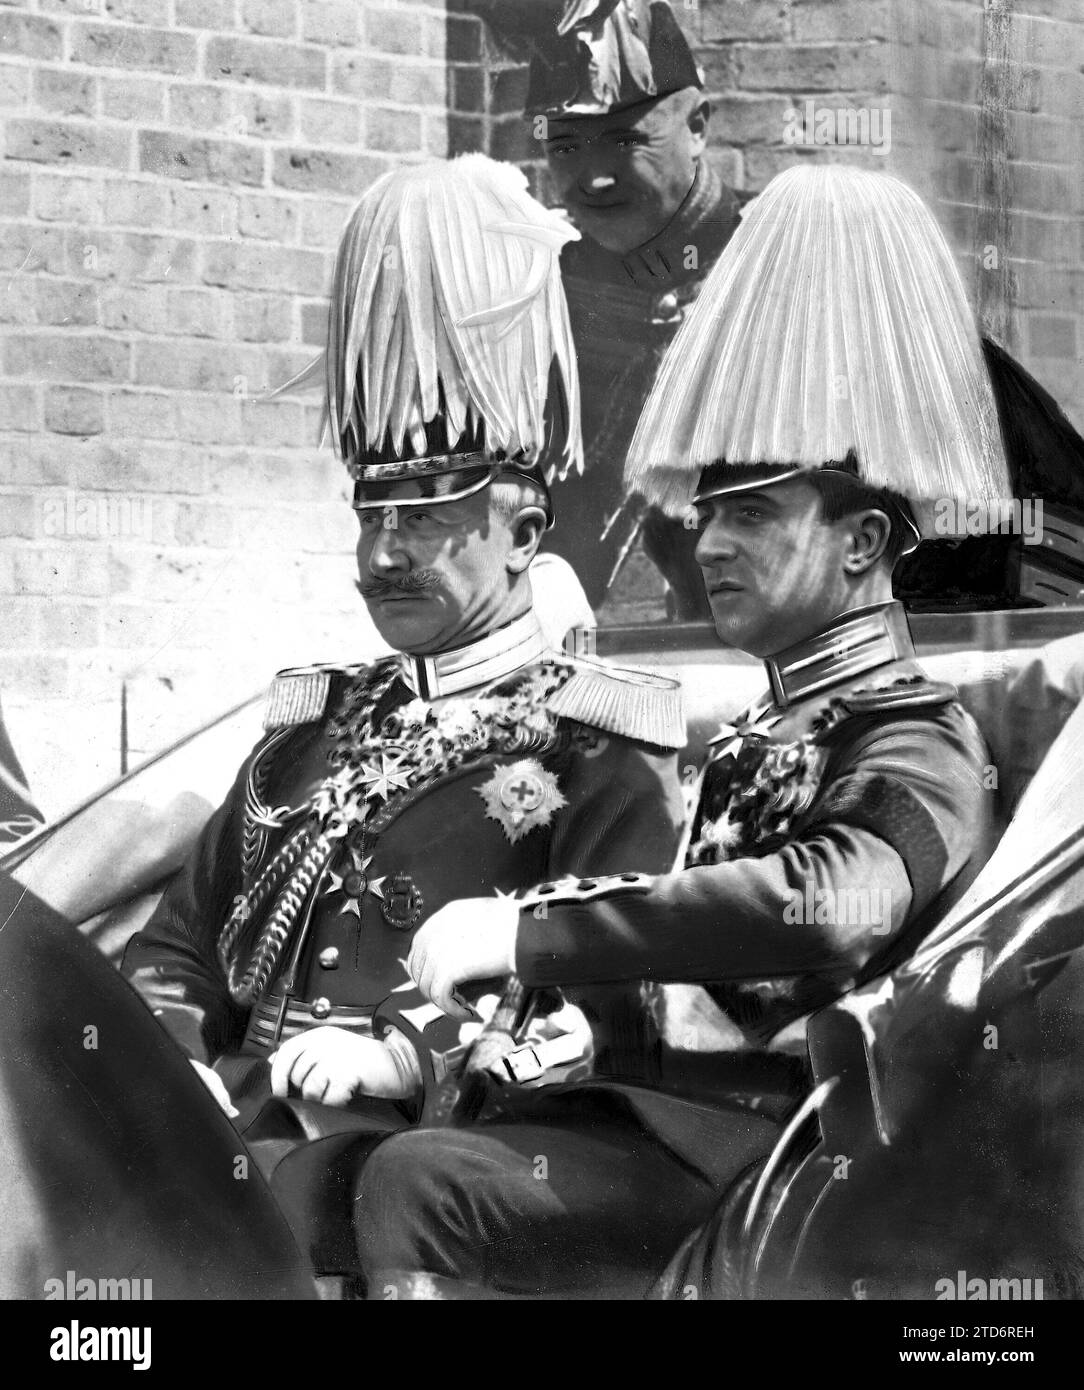 05/31/1914. Funerals for a German Grand Duke. The Kaiser and the new Grand Duke of Mecklenburg Heading to the station after the Funeral of Grand Duke Adolf Frederick of Mereklemburg. Photo: Hugelmann. Credit: Album / Archivo ABC / Louis Hugelmann Stock Photo